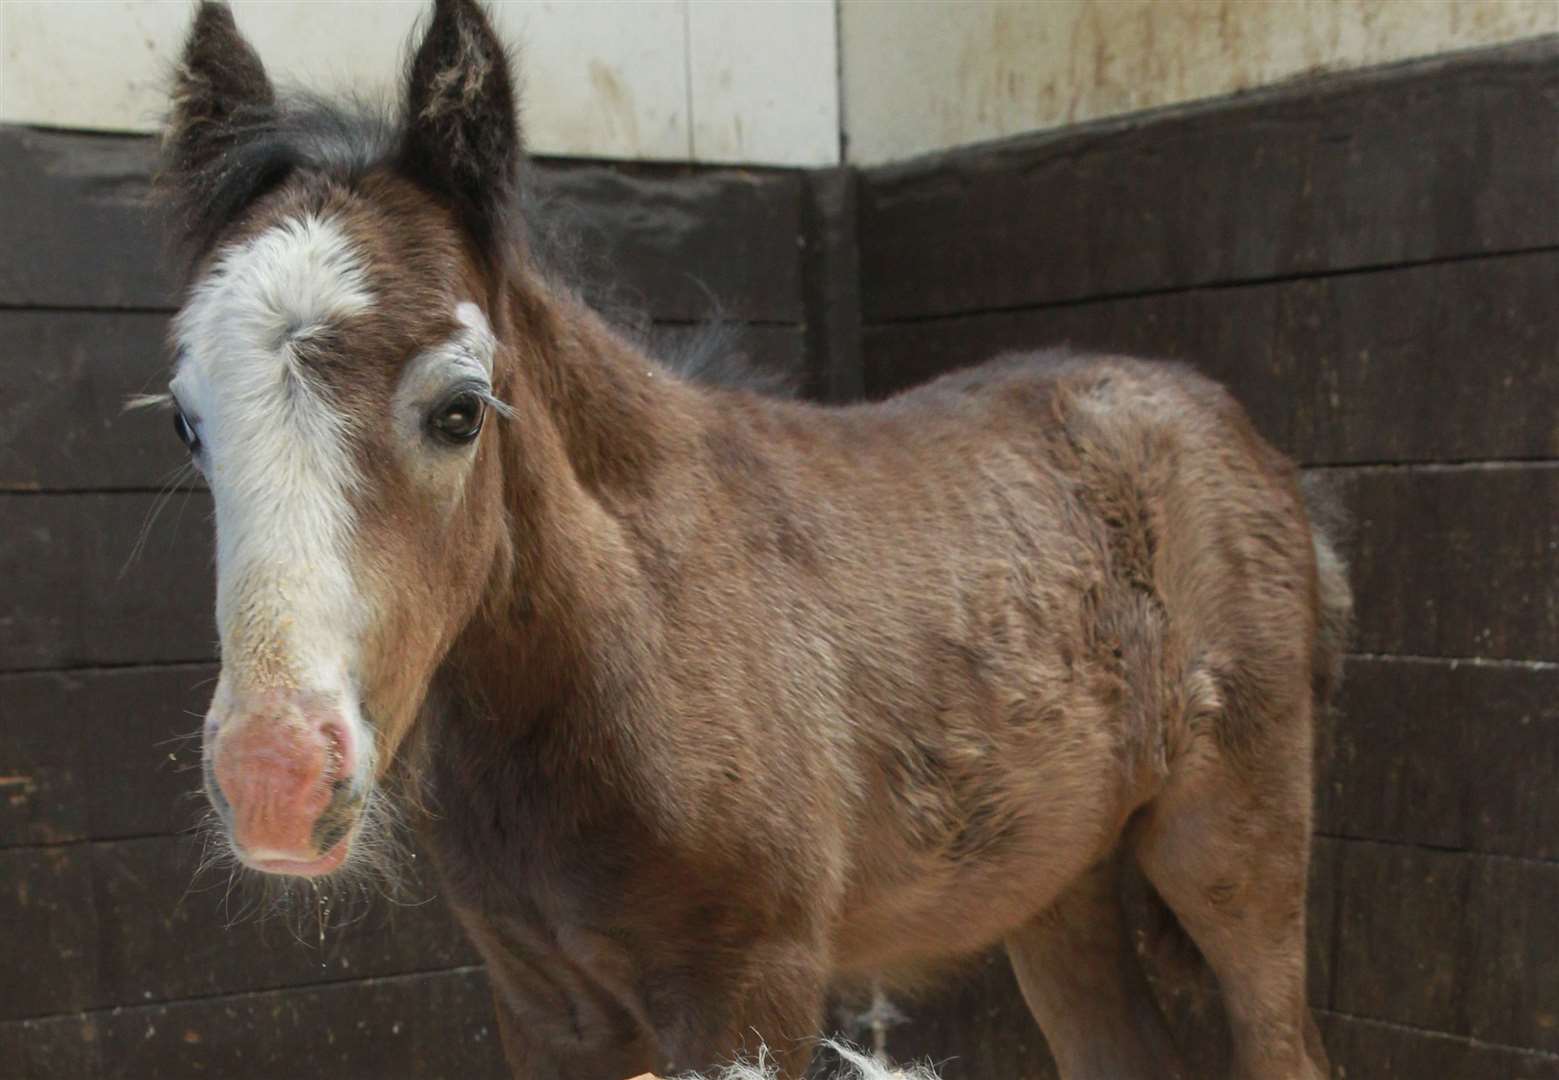 The two-week-old foal had been dumped on a farm